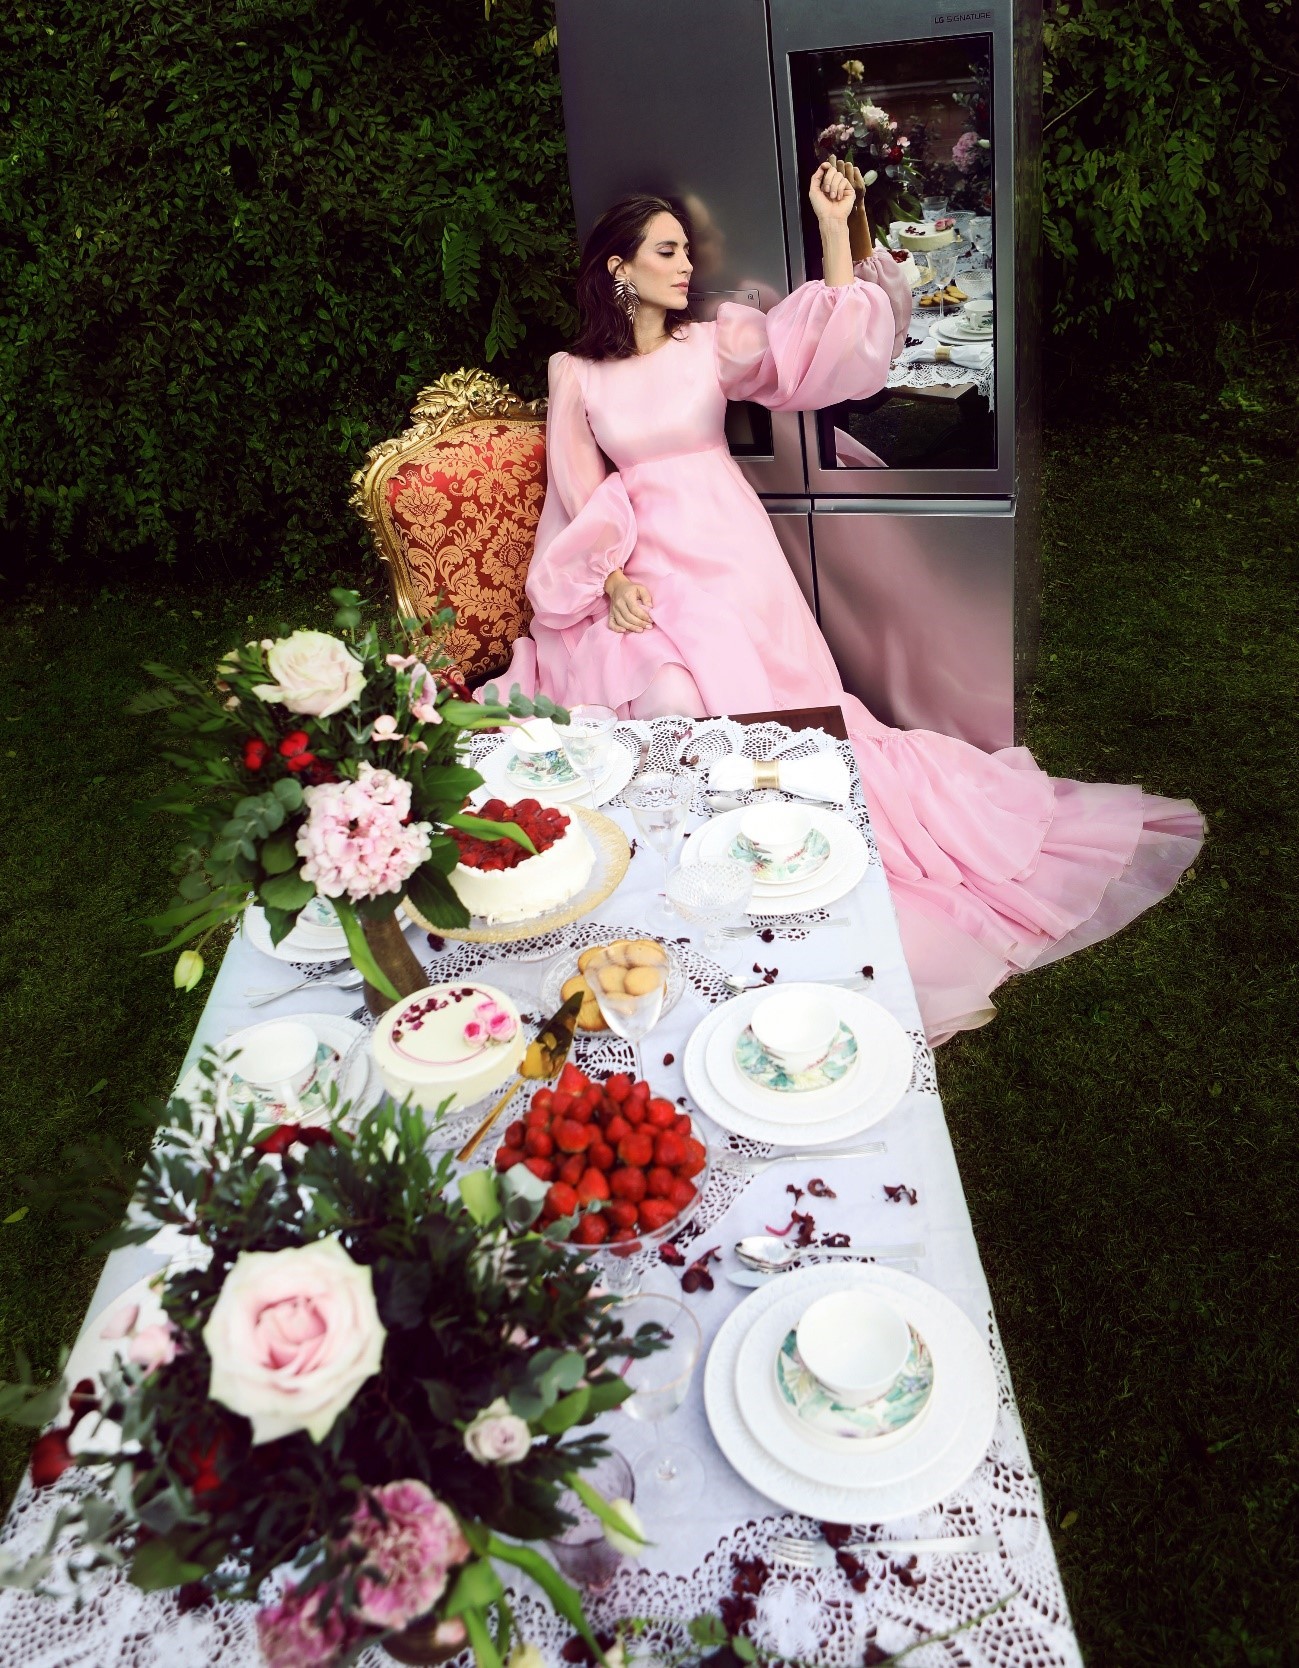 A photo recreating the Mad Hatter tea party scene from Alice in Wonderland, with fashion designer Tamara Falcó sitting at the head of a dinner table as she leans back against the LG SIGNATURE Door-in-Door refrigerator and touches the InstaView panel.